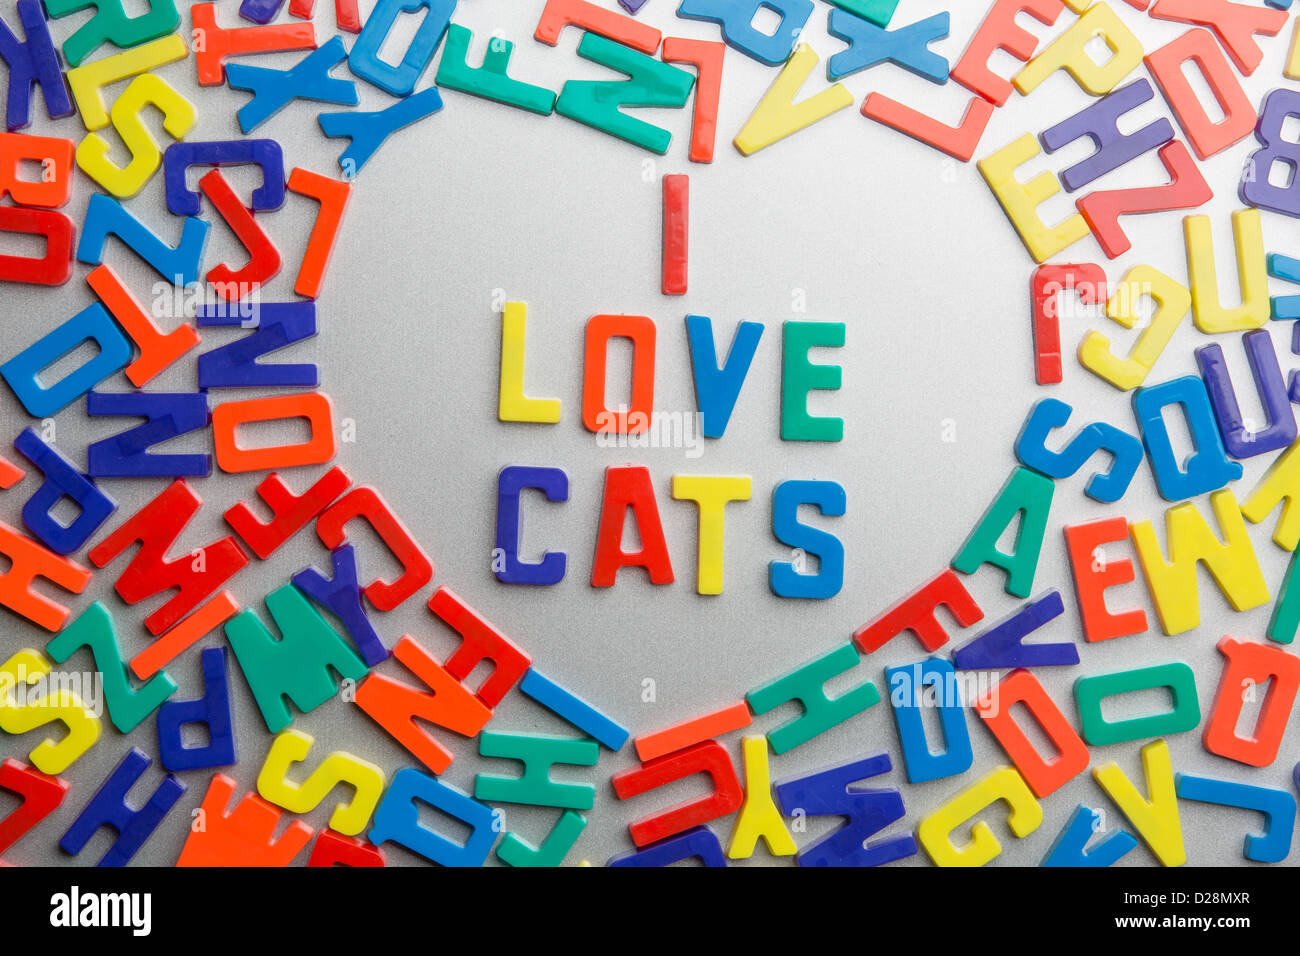 'I Love Cats' - refrigerator magnets spell messages out of a jumble of letters Stock Photo